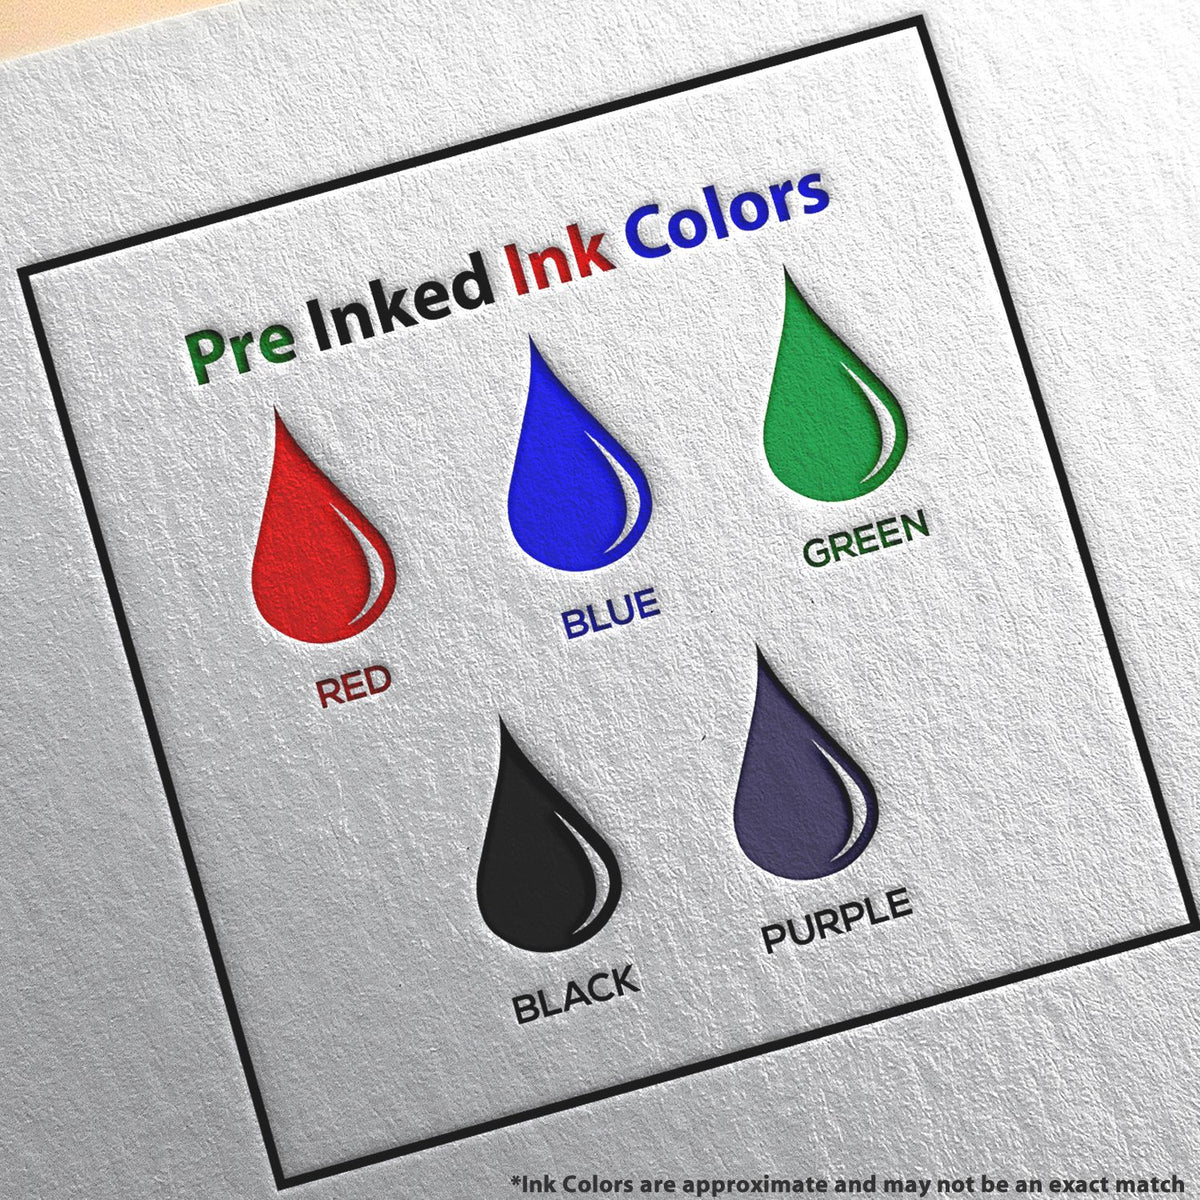 A picture showing the different ink colors or hues available for the Slim Pre-Inked Rectangular Notary Stamp for Washington product.